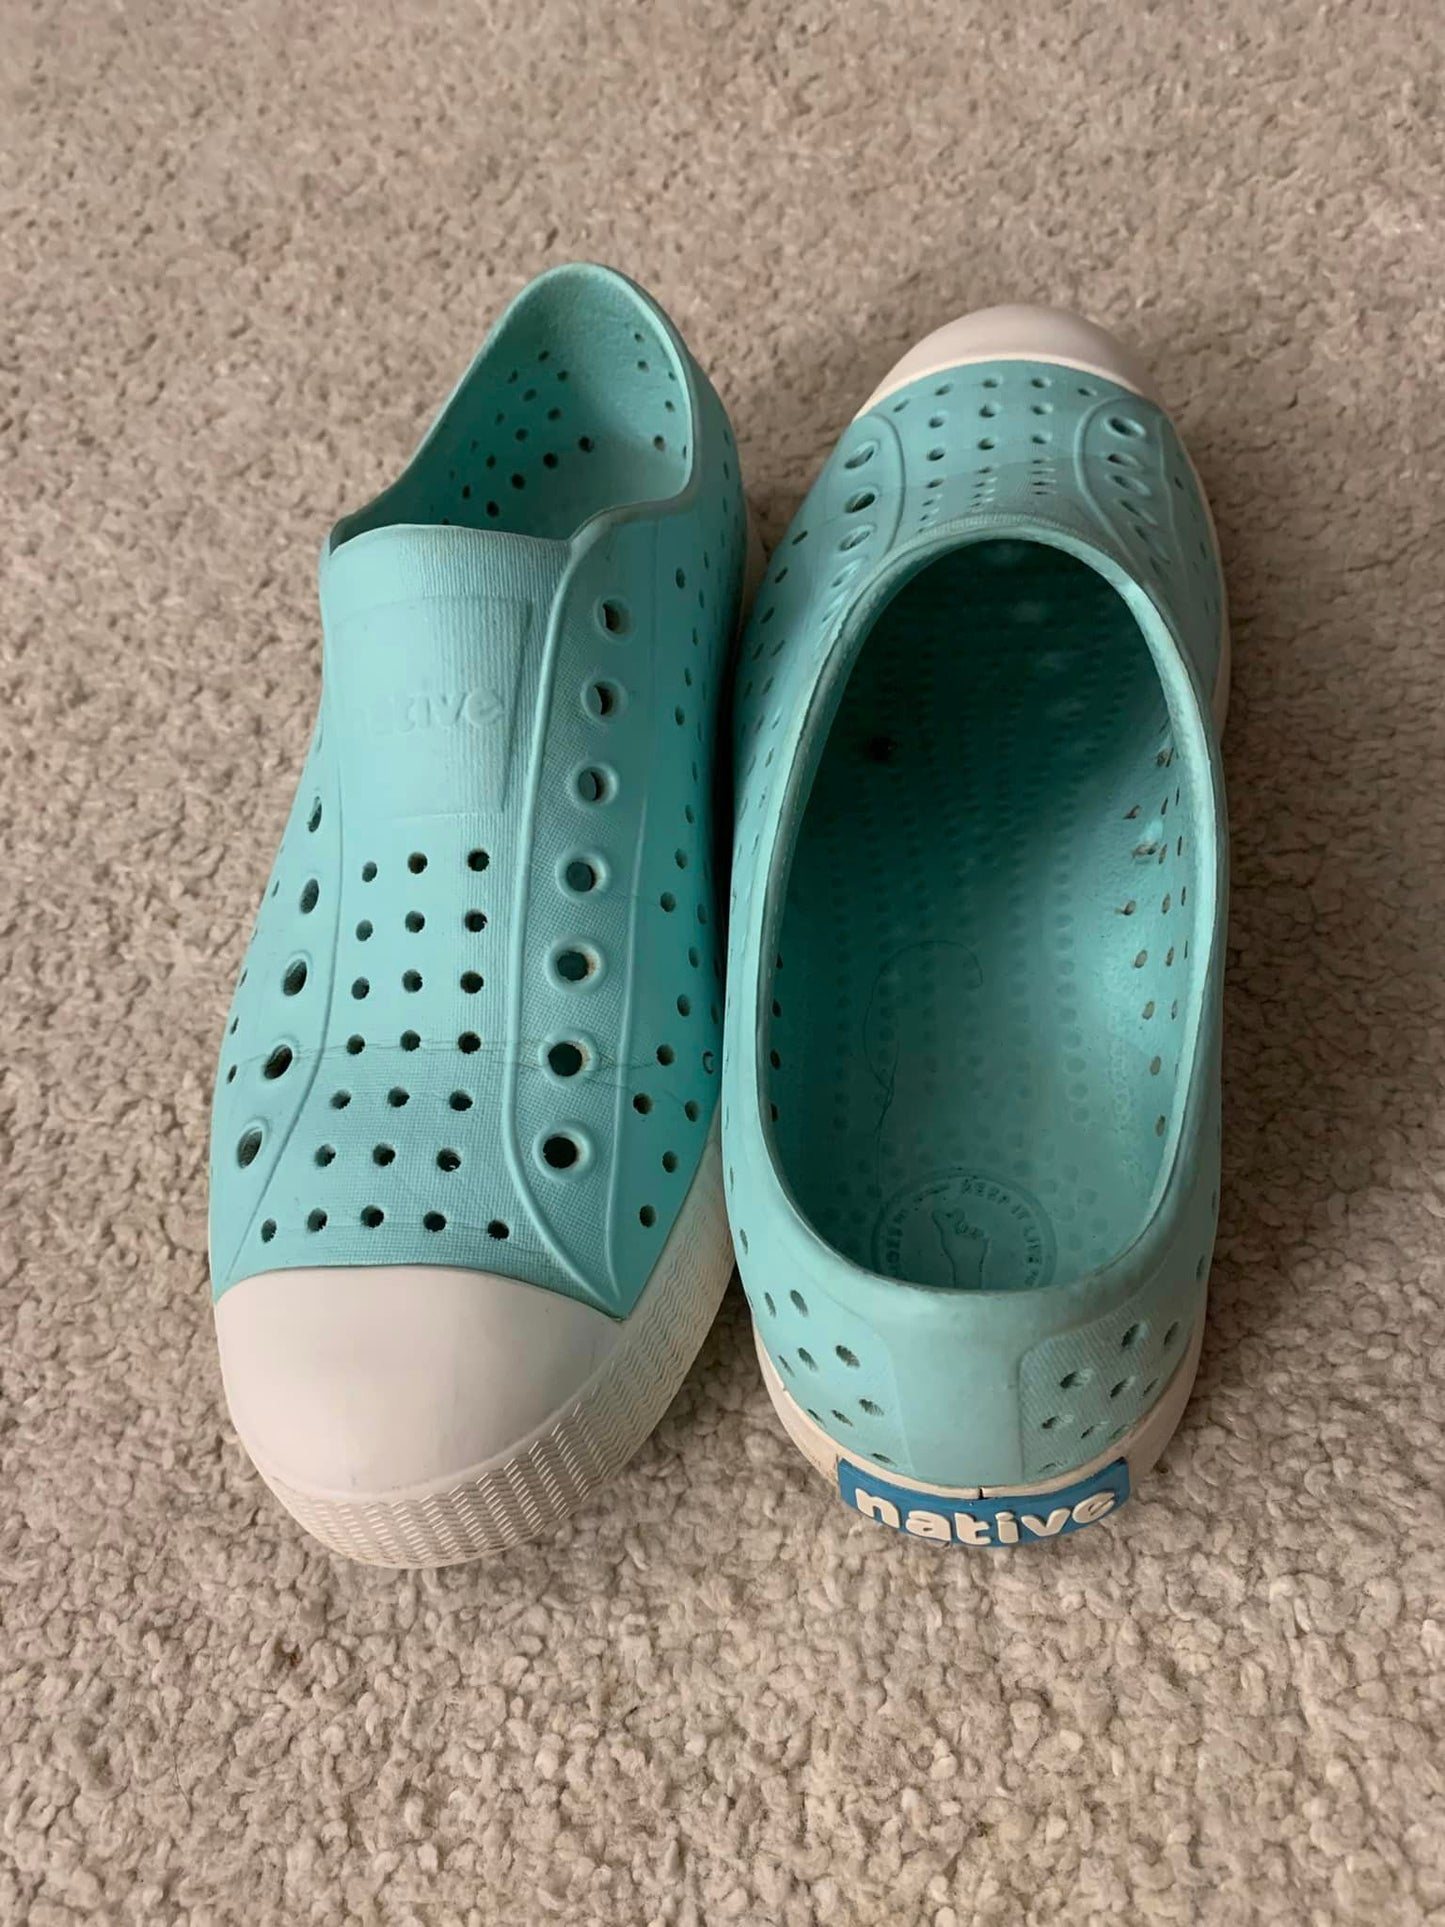 Natives Size J5 (Teal and White)